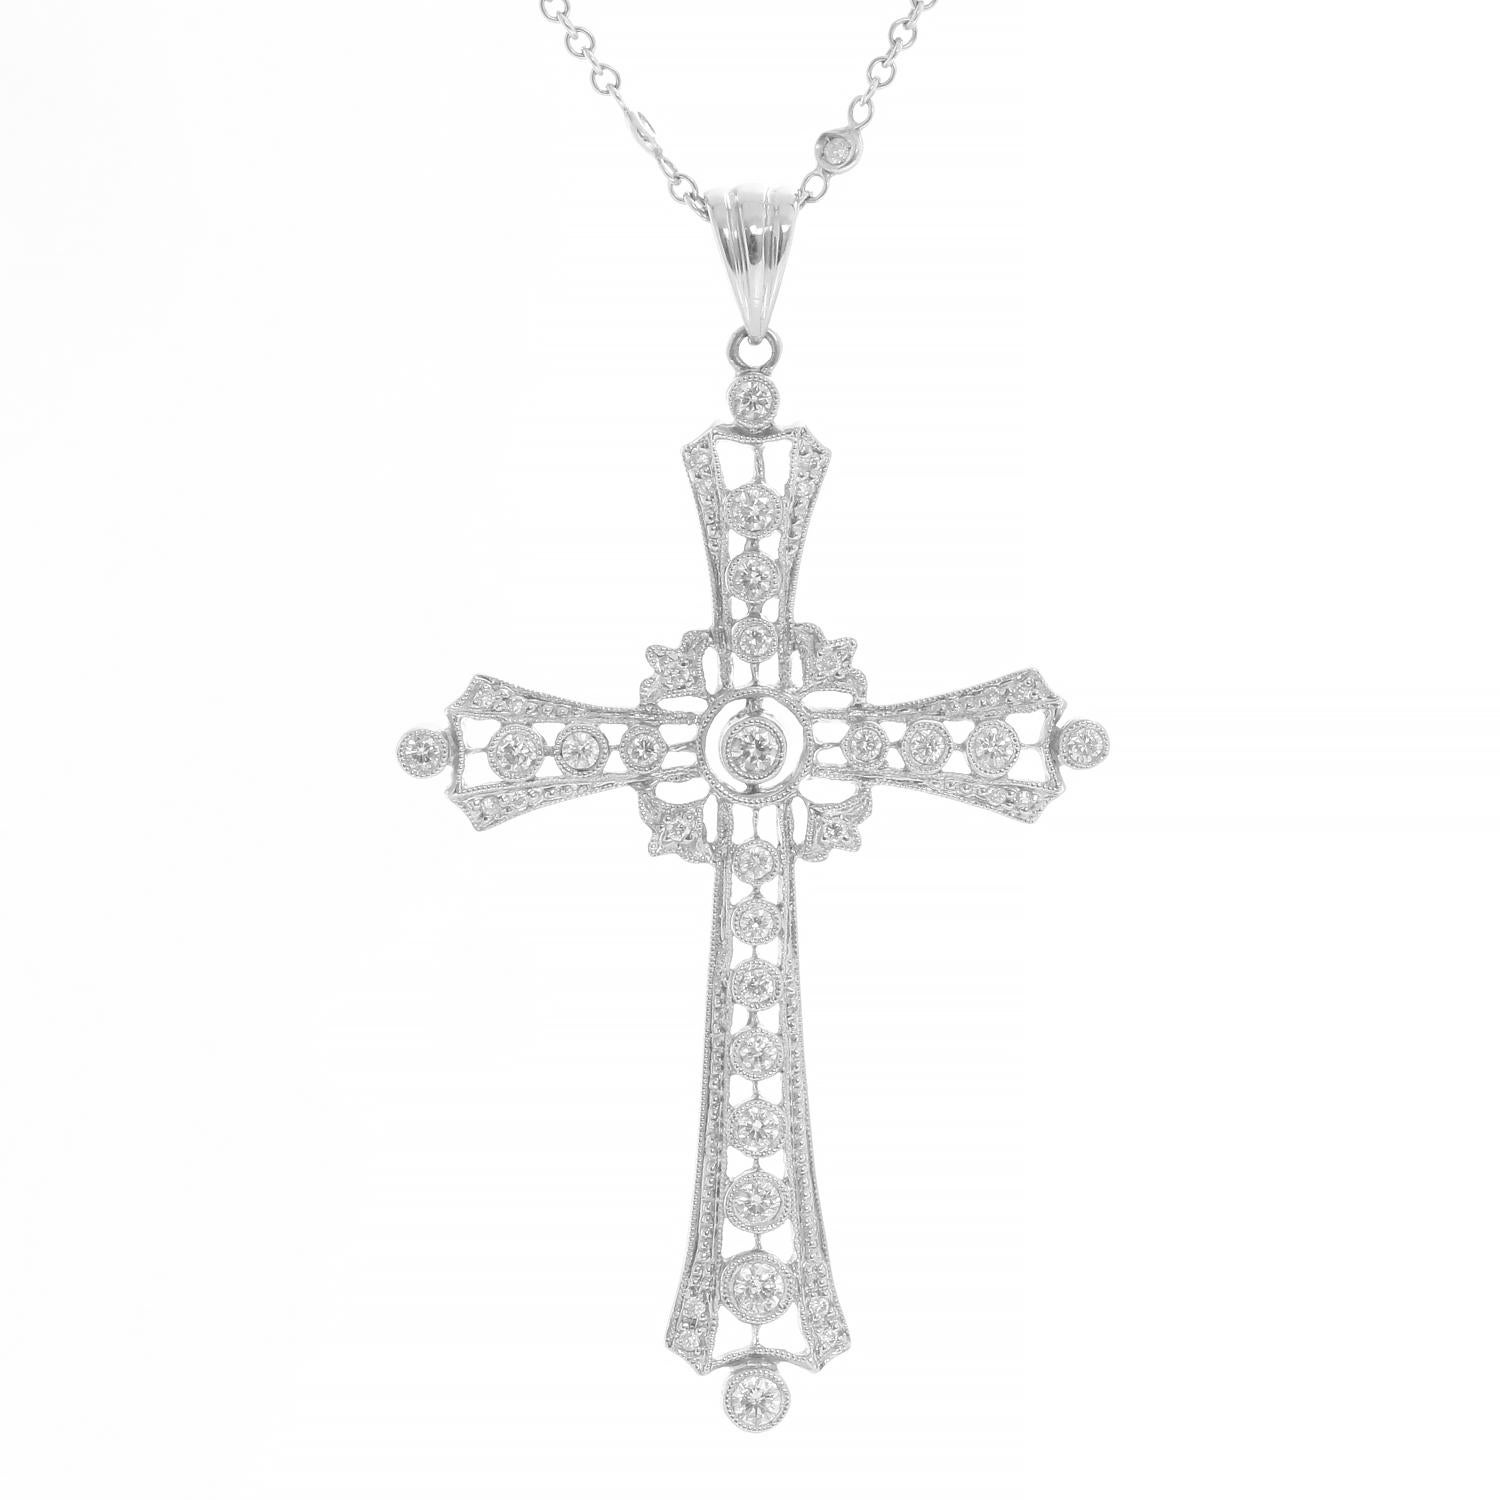 18K White Gold cross approx. 1.2 ct. VS-SI, HI color. on a 10 inch diamonds by the yard chain. Total diamond chain 1 ct.

Sue Gragg is a jewelry designer based in Dallas, Texas, known for her unique and high-end jewelry designs. Her jewelry is often